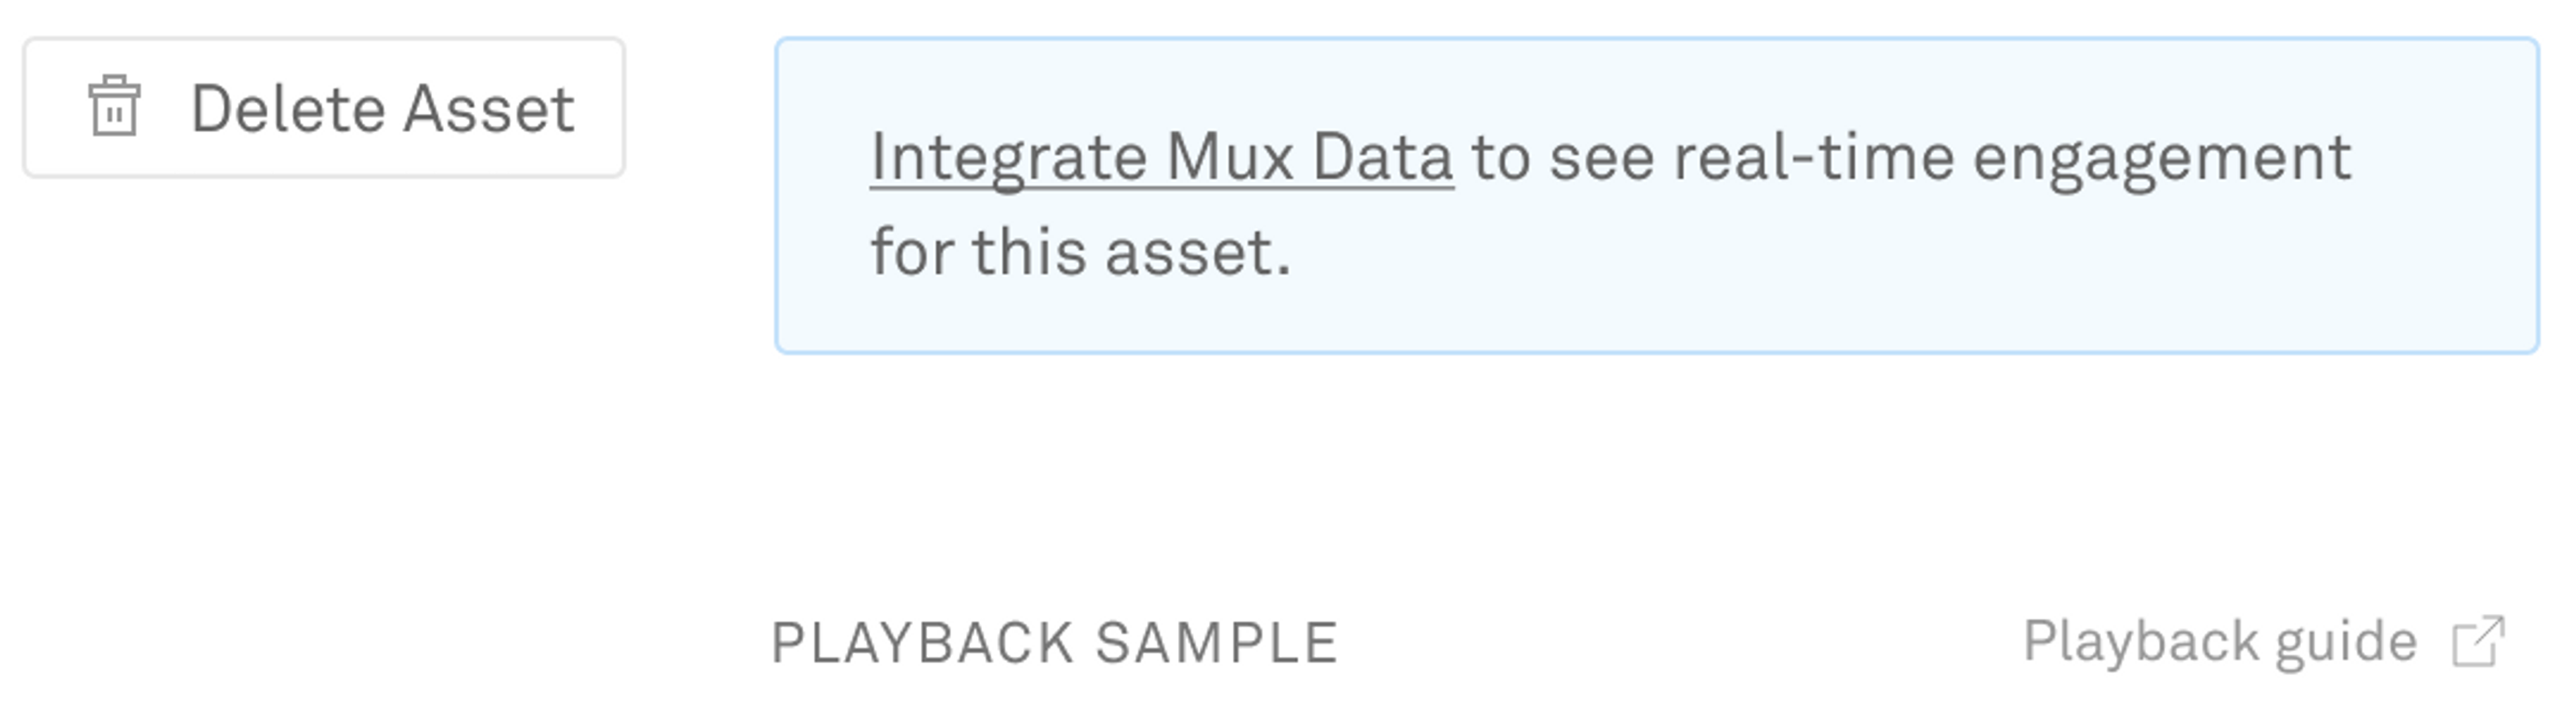 Integrate Mux Data to see real-time engagement for this asset.